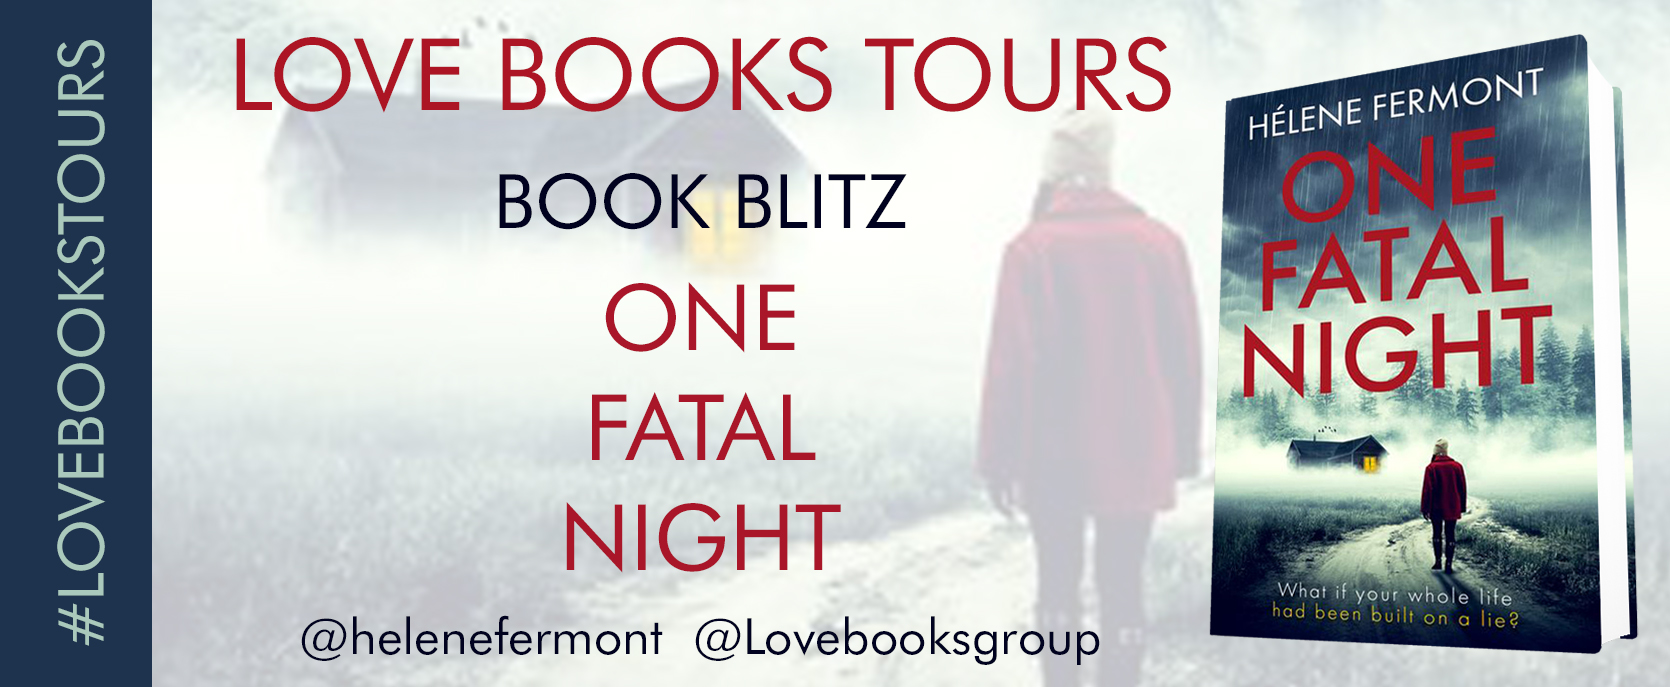 book tour poster for One Fatal Night by Helene Fermont